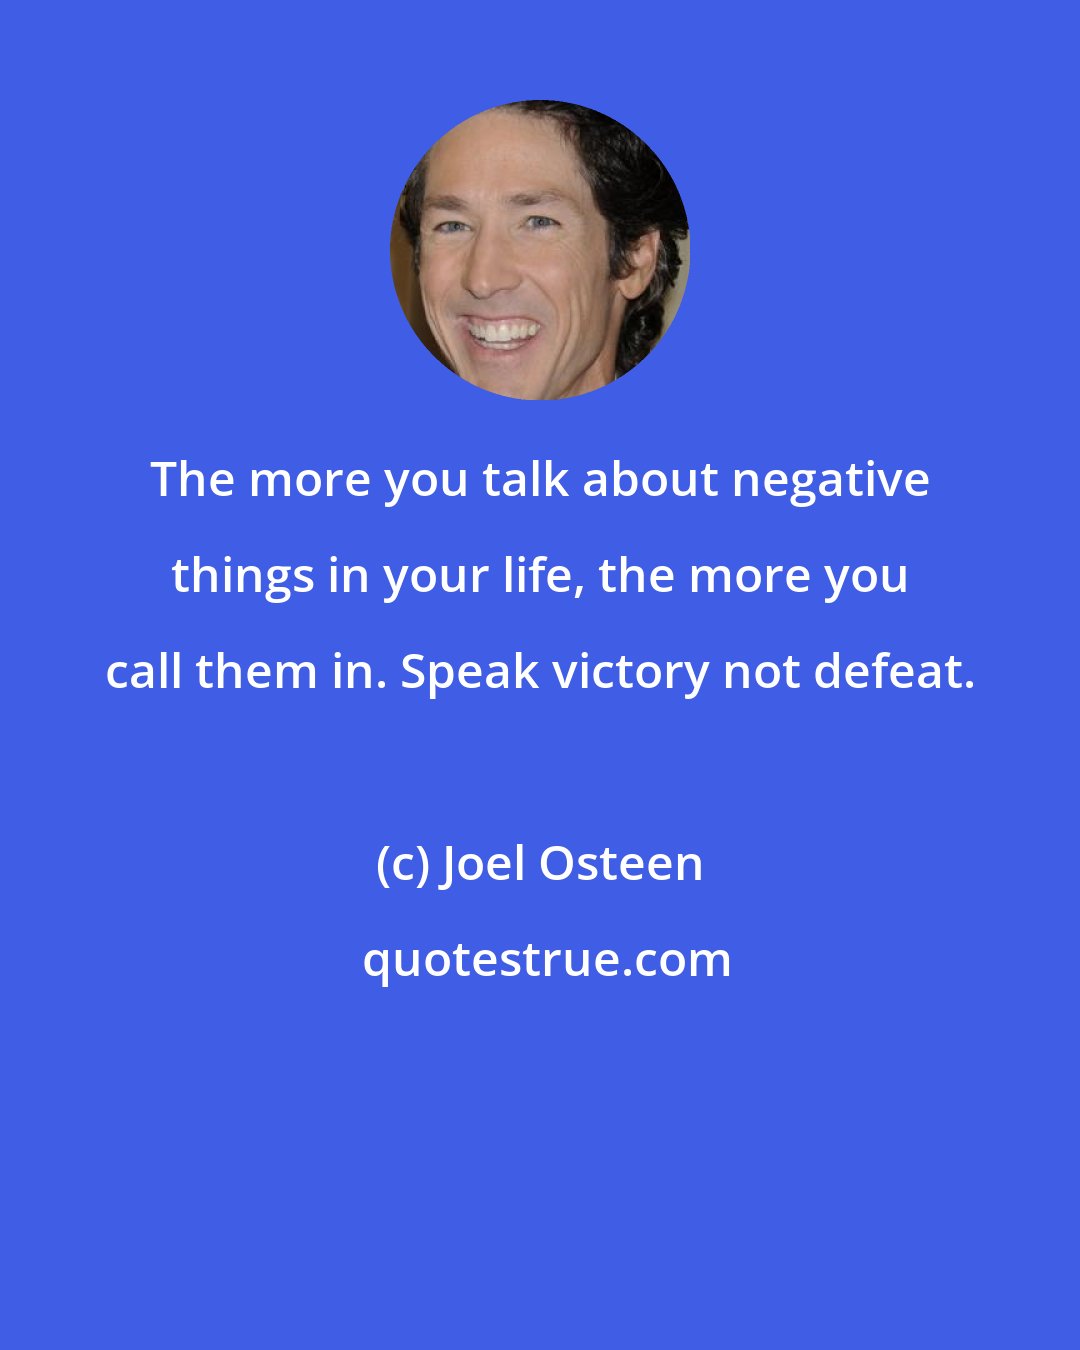 Joel Osteen: The more you talk about negative things in your life, the more you call them in. Speak victory not defeat.